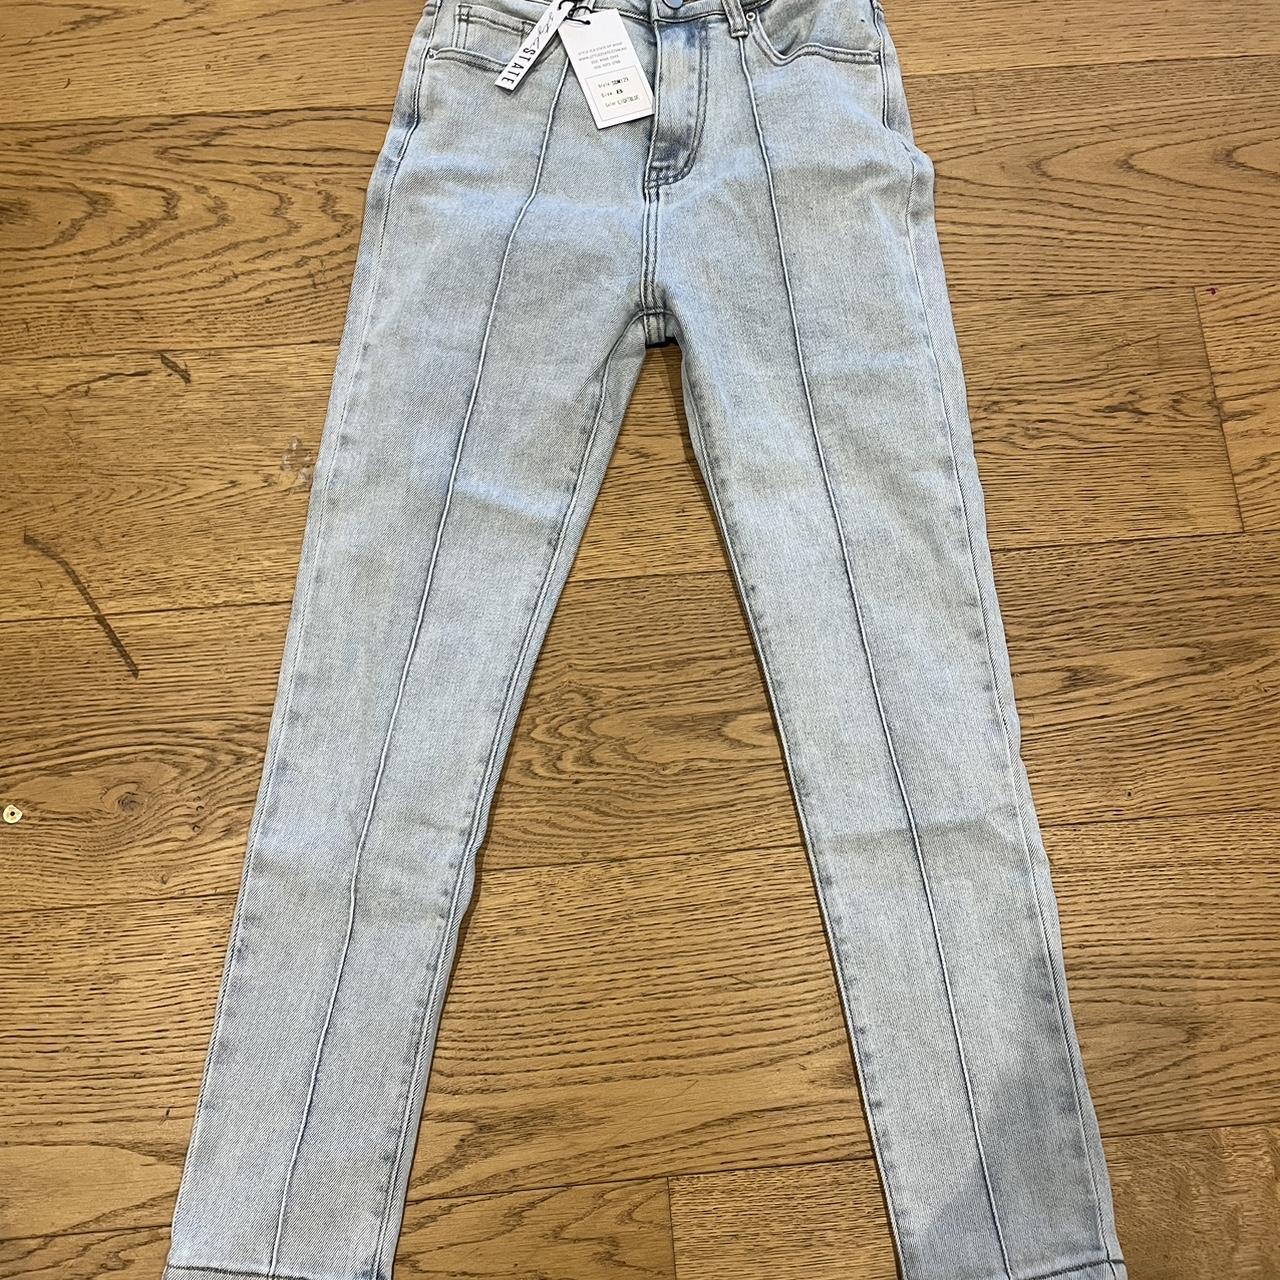 BNWT Size 8 Style State Light Blue Denim Jeans with... - Depop